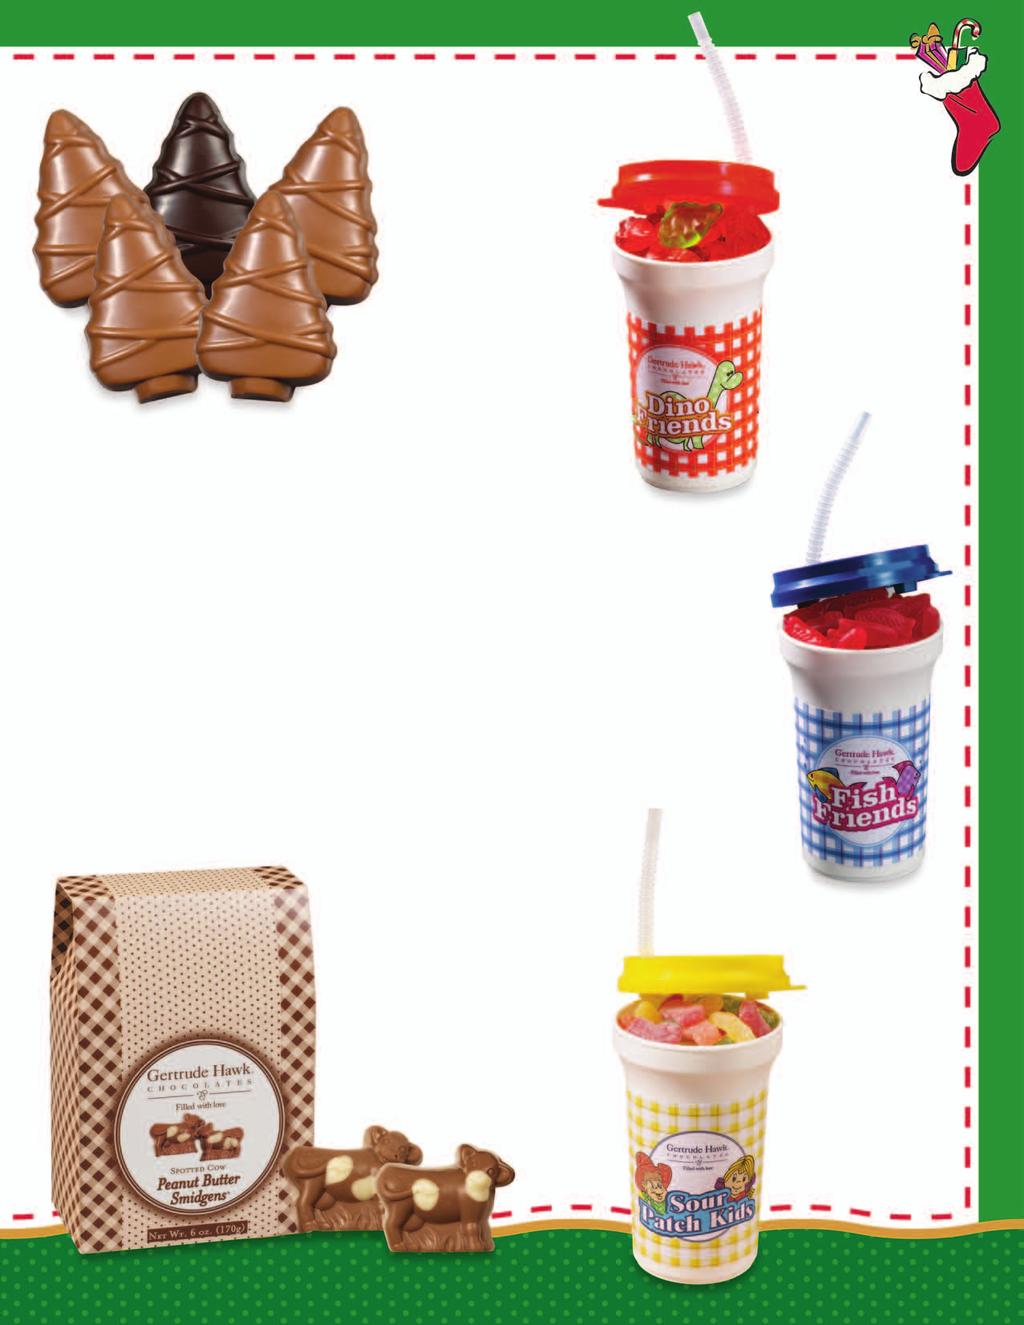 70 Mini Chocolate Tree Assortment Surtido de arbolitos They re perfect for stuffing stockings.